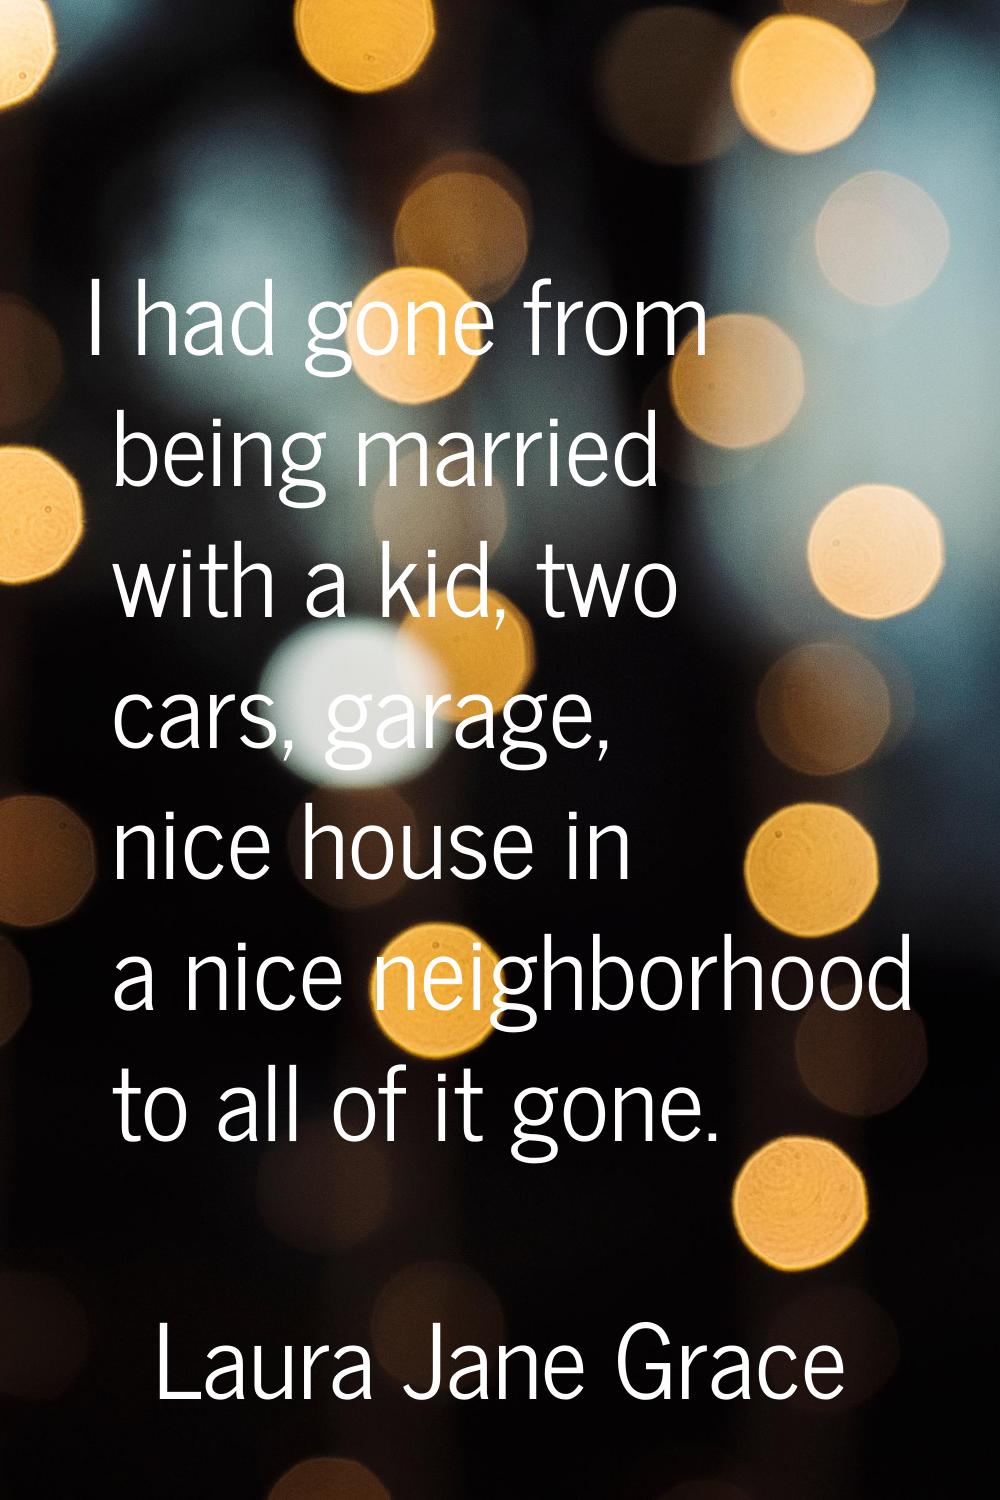 I had gone from being married with a kid, two cars, garage, nice house in a nice neighborhood to al